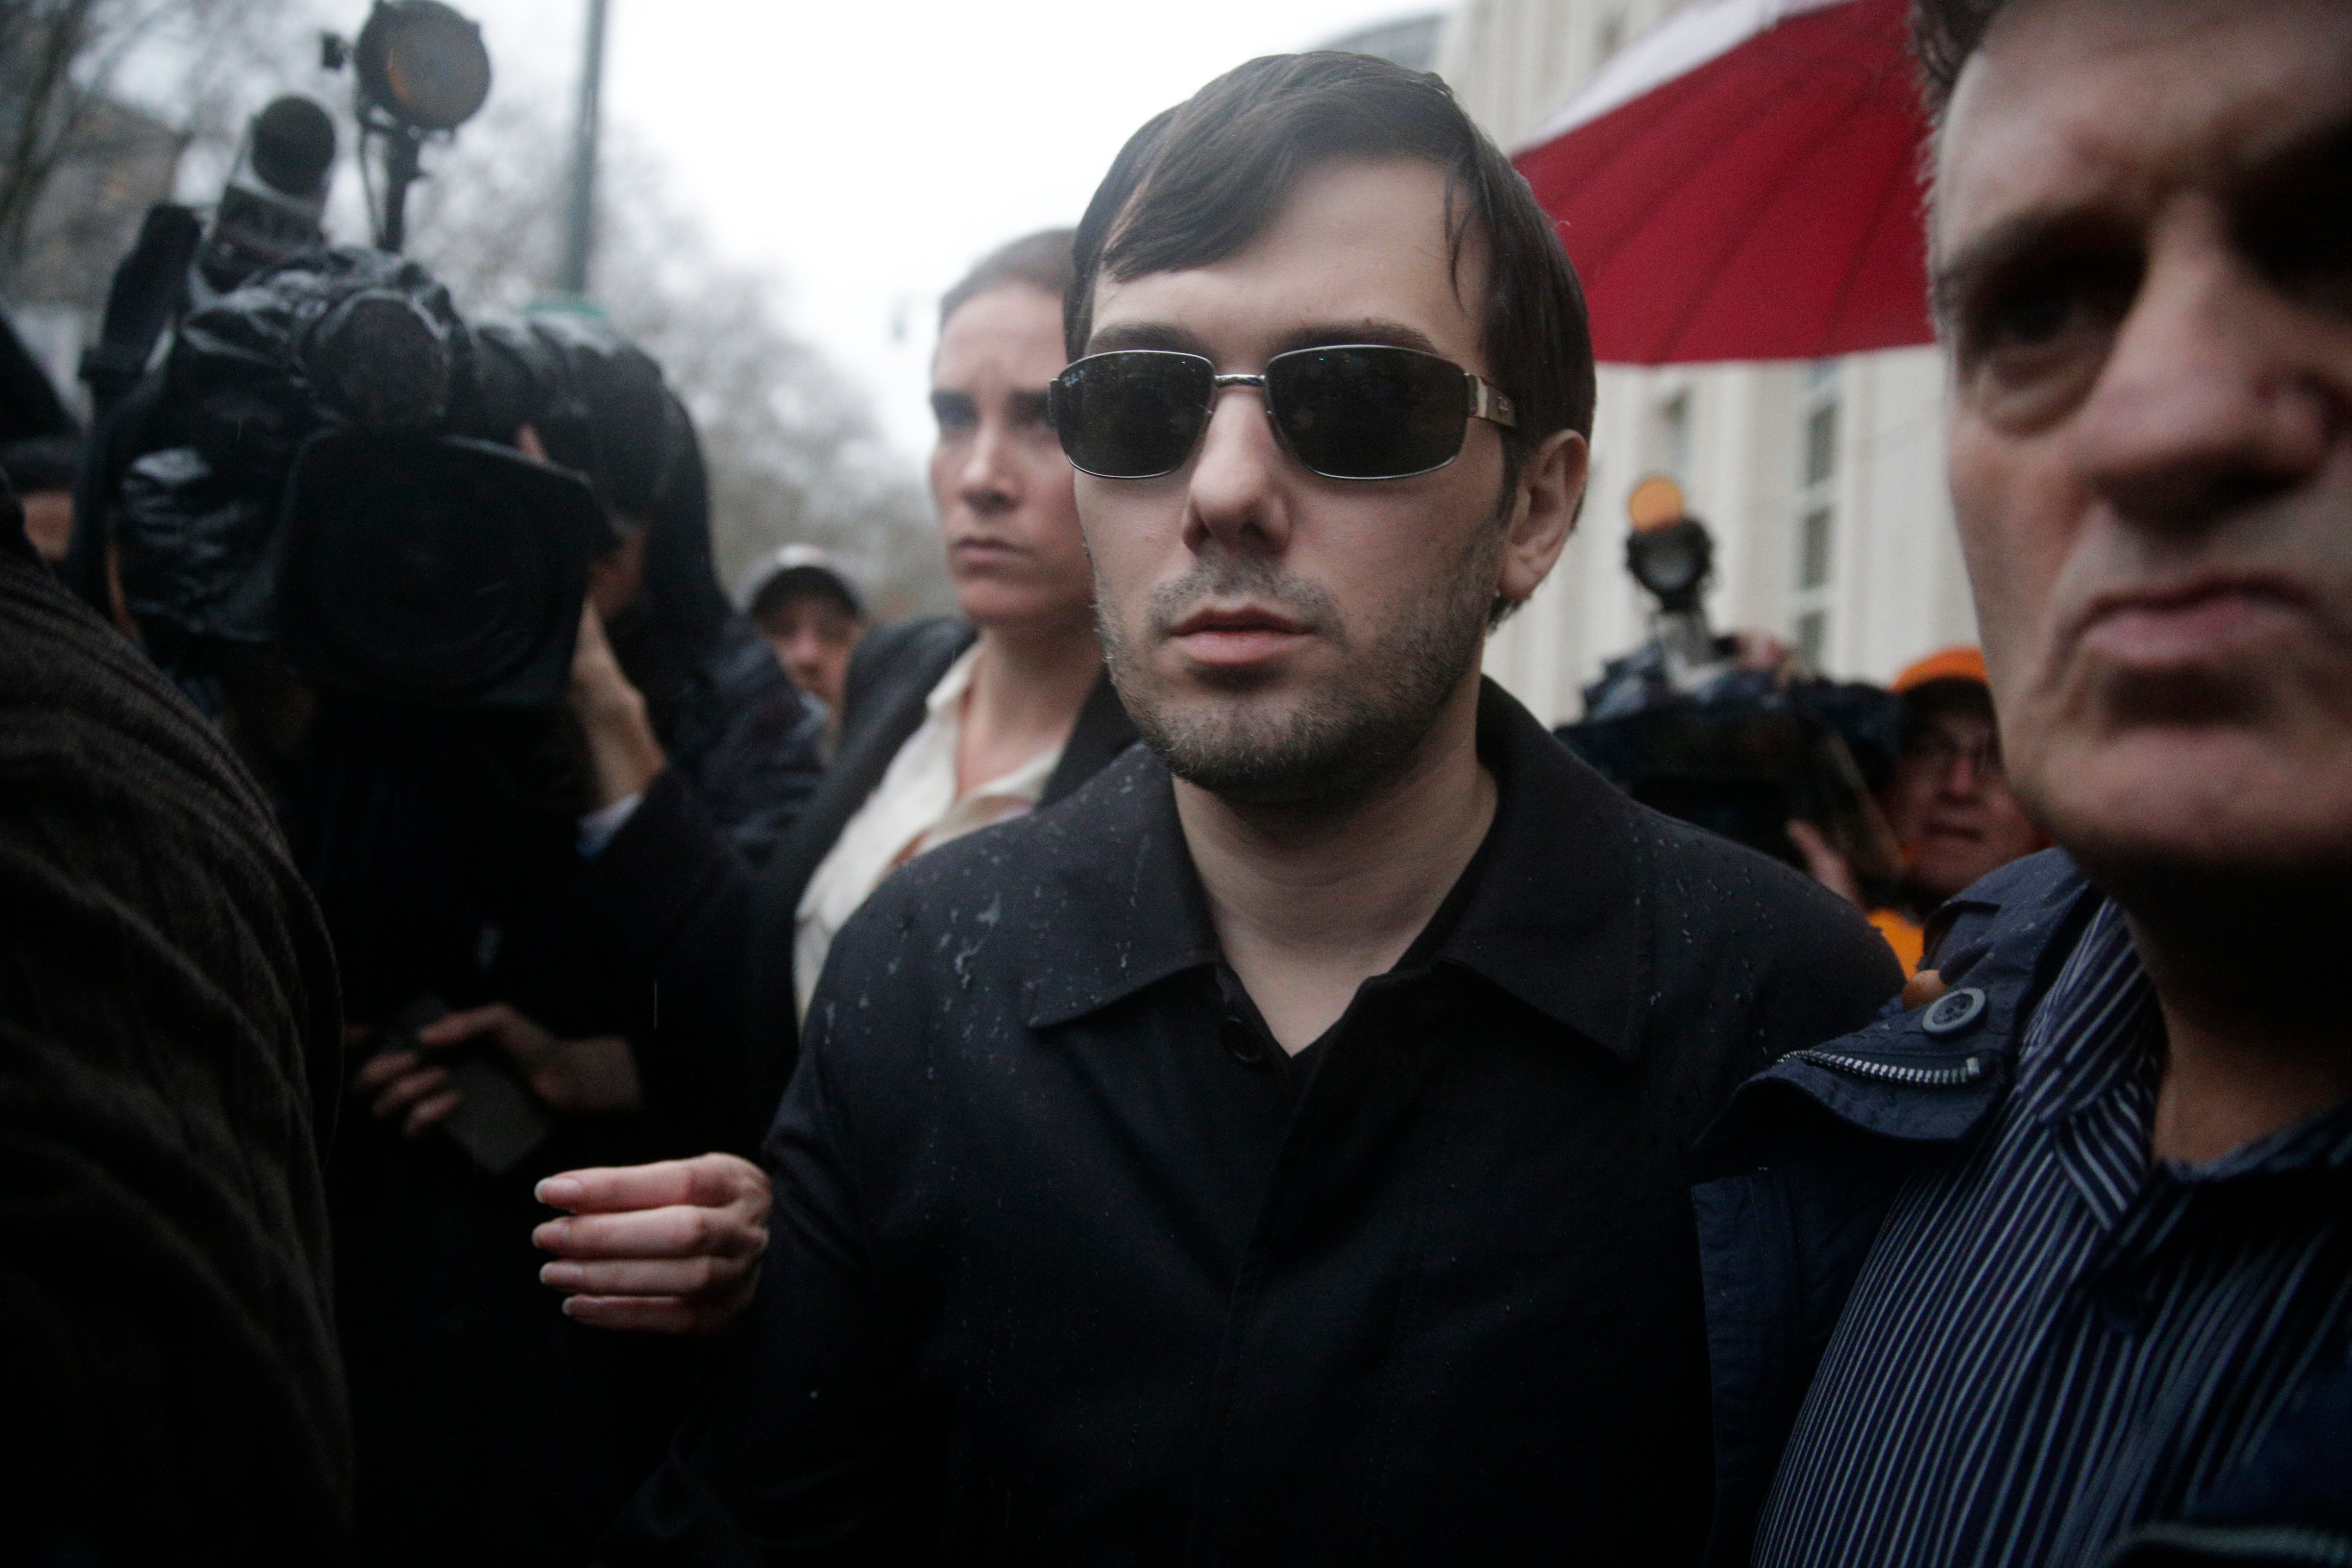 Martin Shkreli, former CEO of Turing Pharmaceuticals, leaves a U.S. Federal courthouse following an arraignment on charges of securities fraud in New York, on Dec. 17, 2015. (Andrew Gombert—EPA)